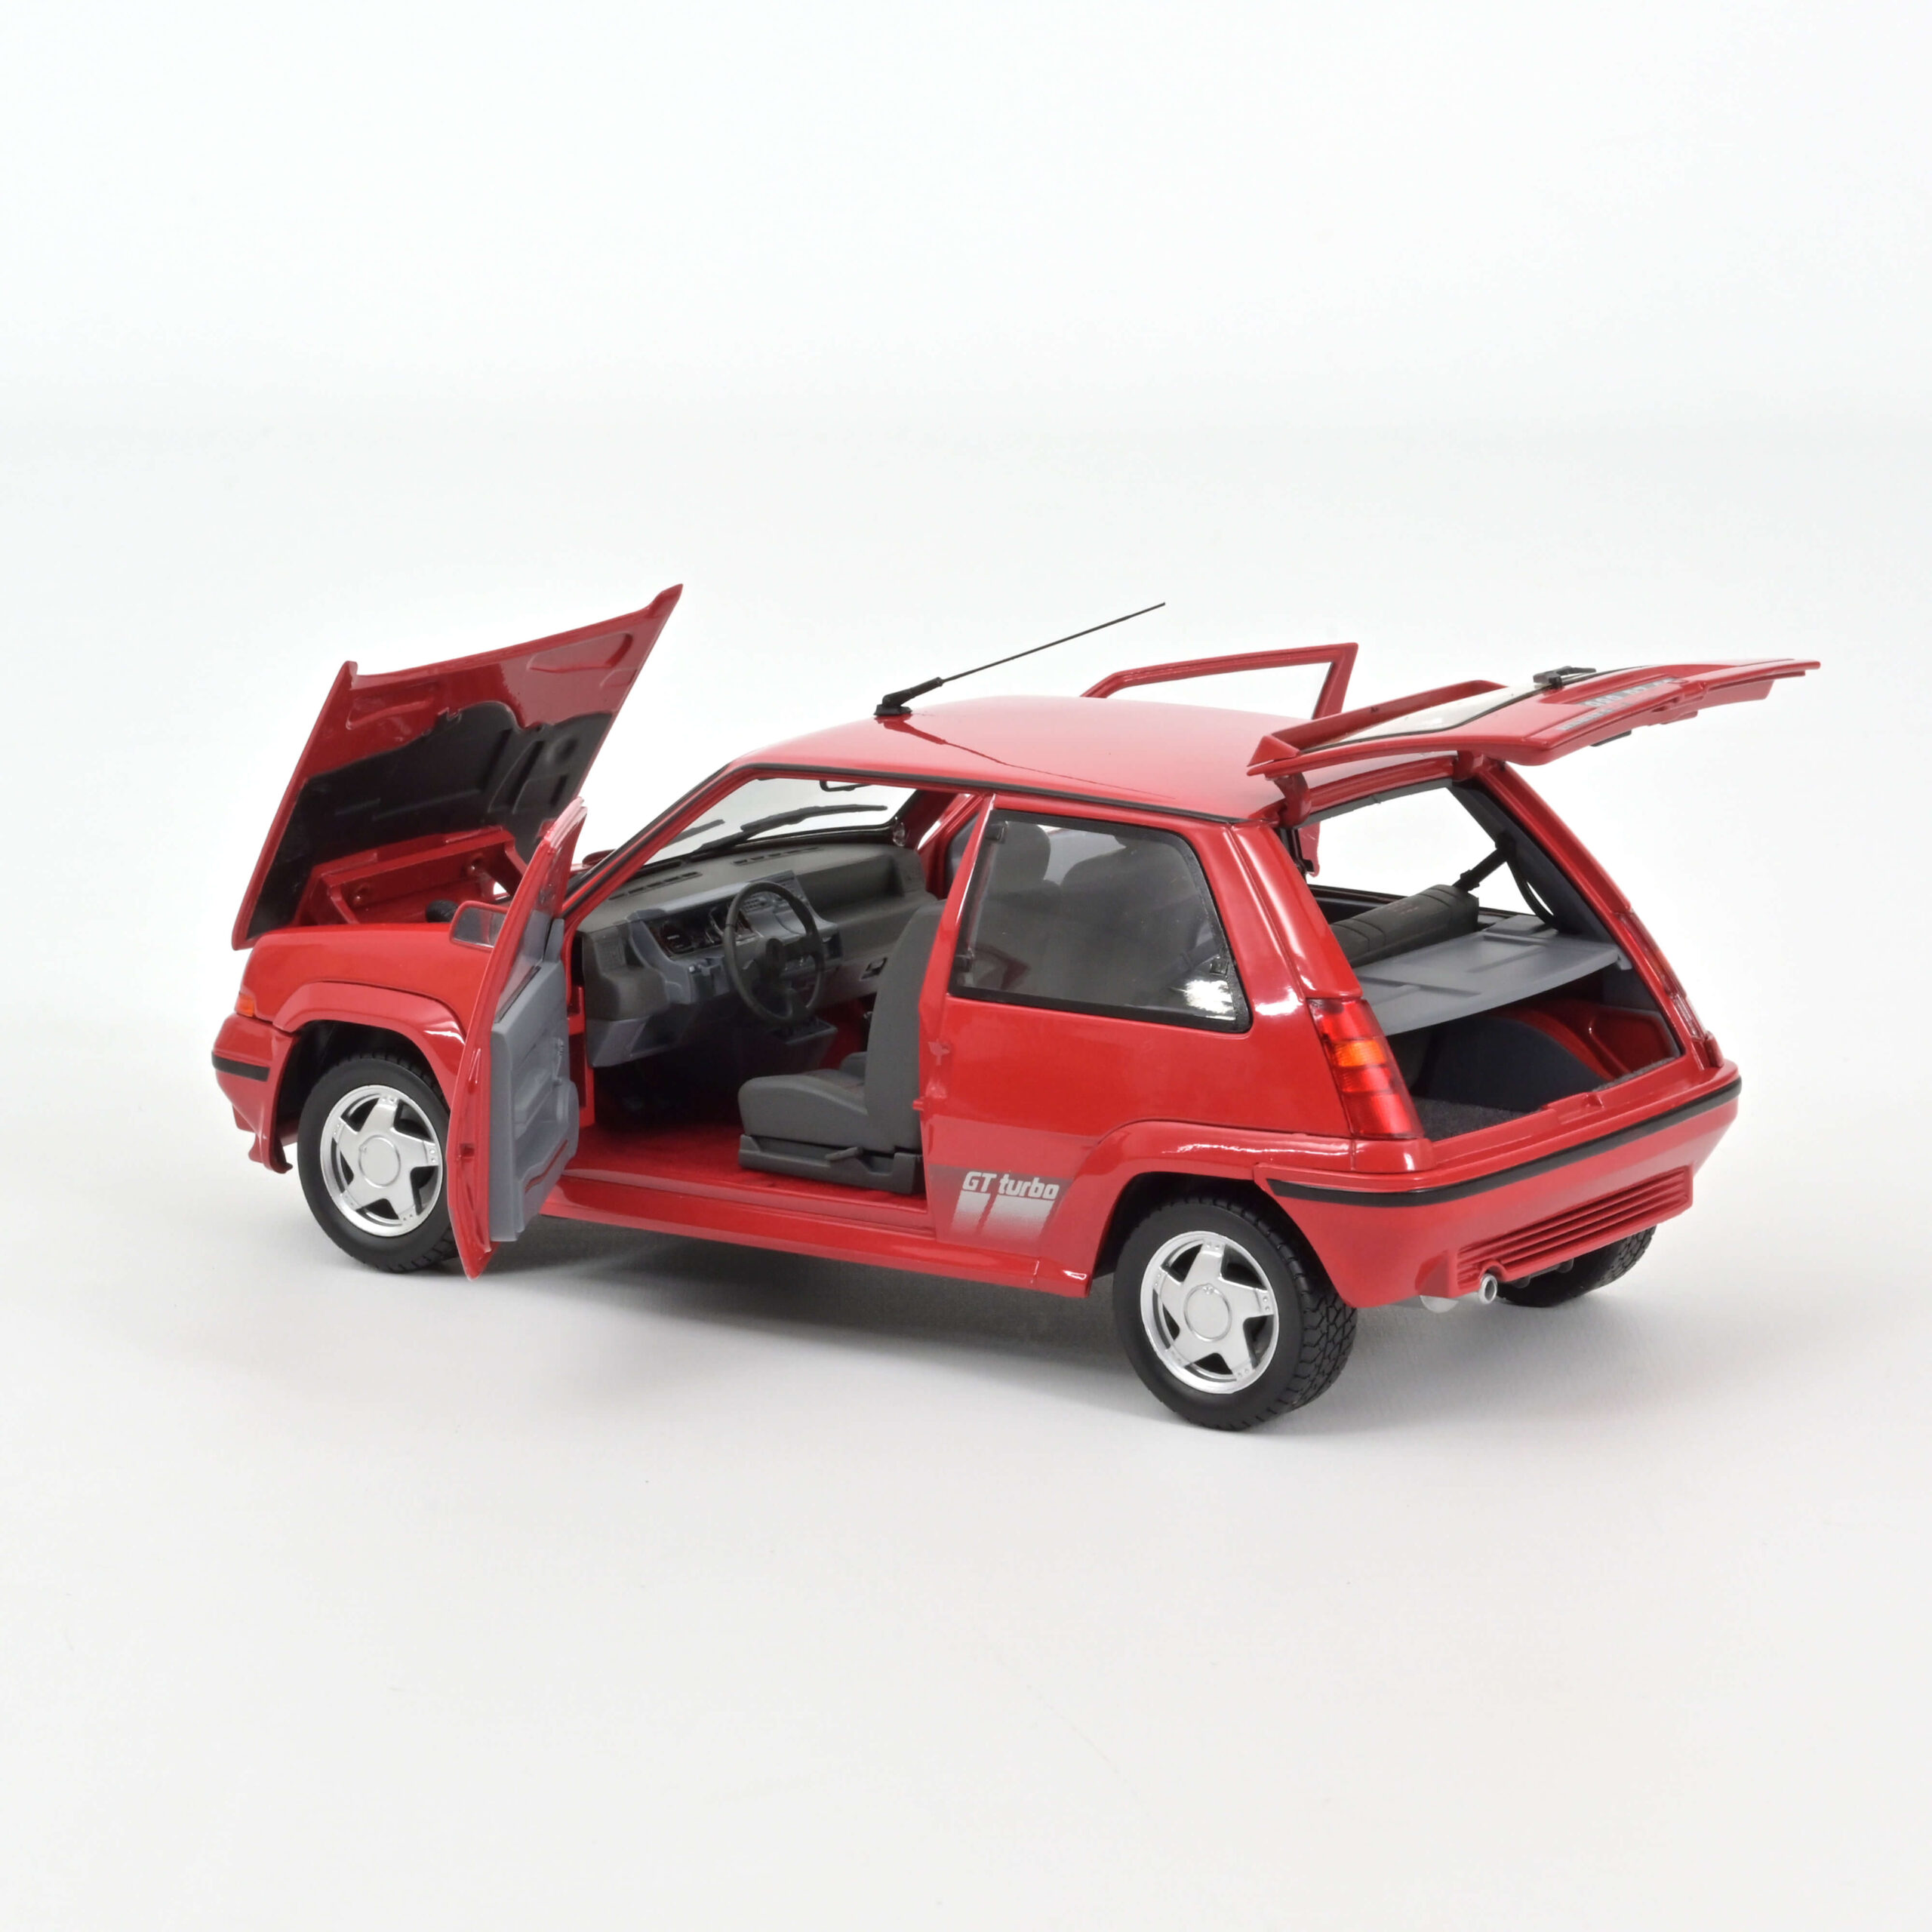 Renault Supercinq GT Turbo 1989 – Red